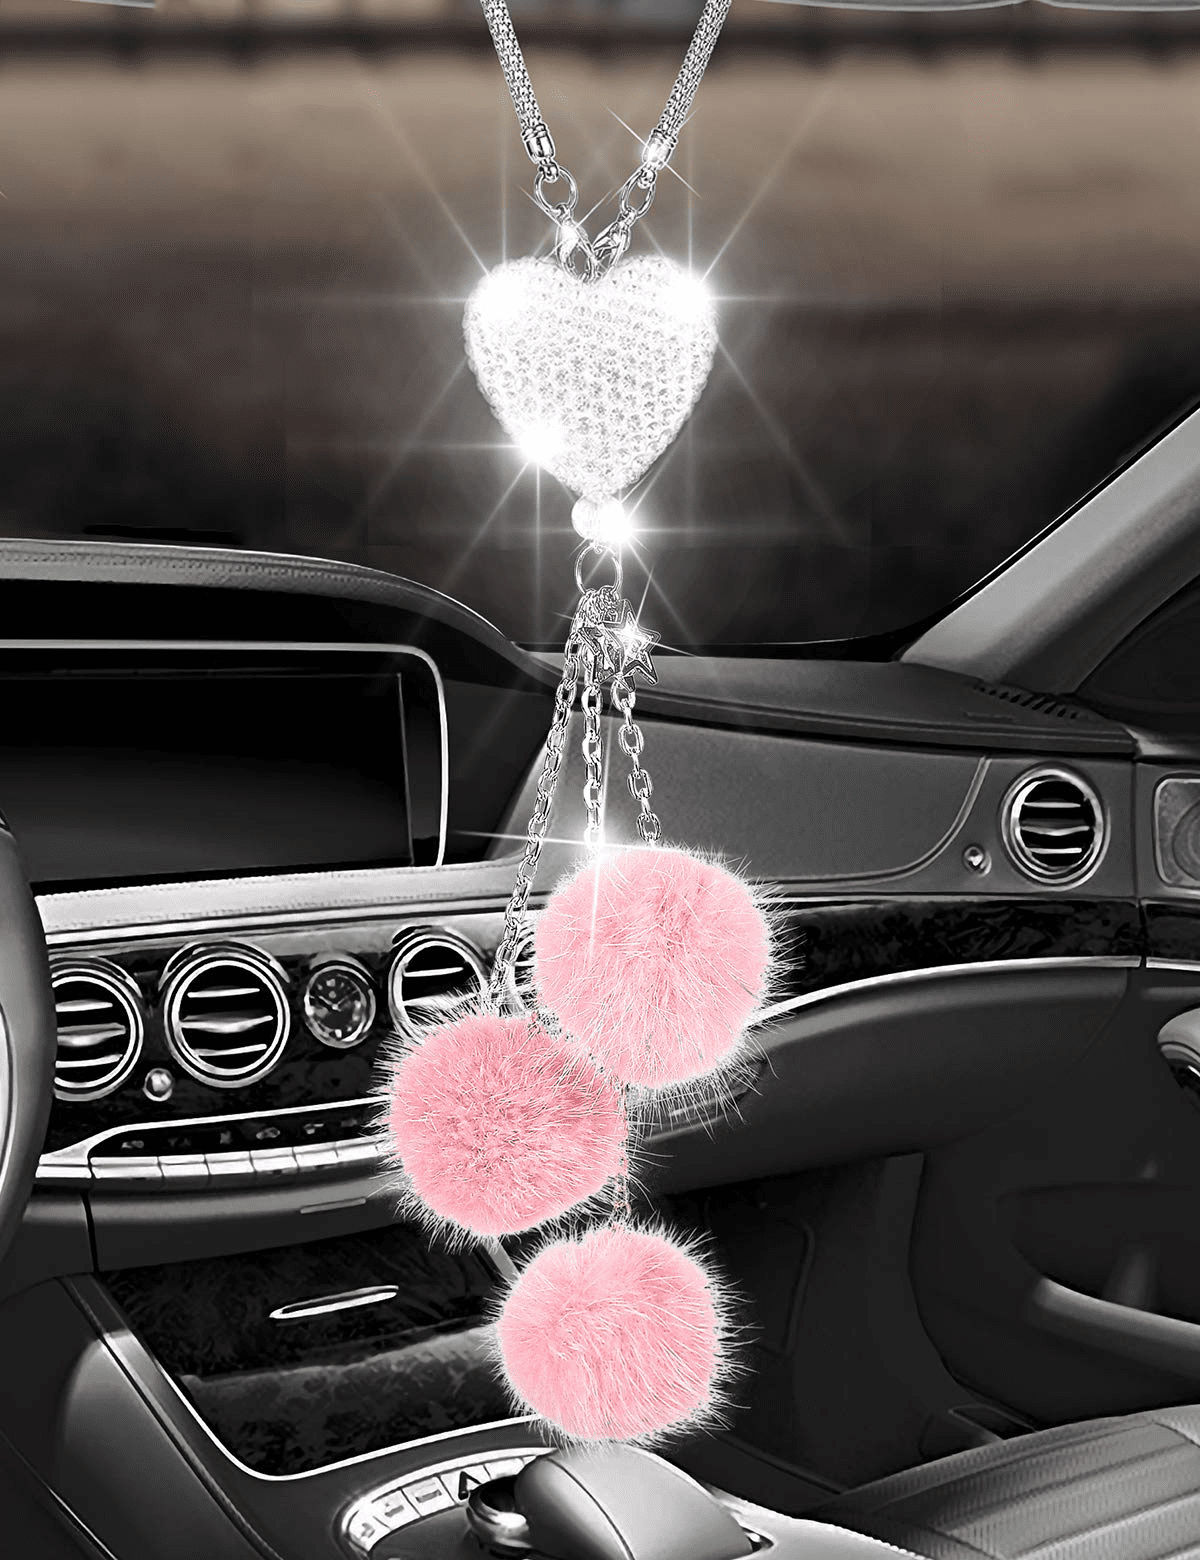 7 Pieces Car Bling Accessories Butterfly Vent Clips Decors Car Coasters Rear View Mirror Rhinestone Ball Hanging Ornament Car Bling Rings Emblem Stickers for Women Bright Color